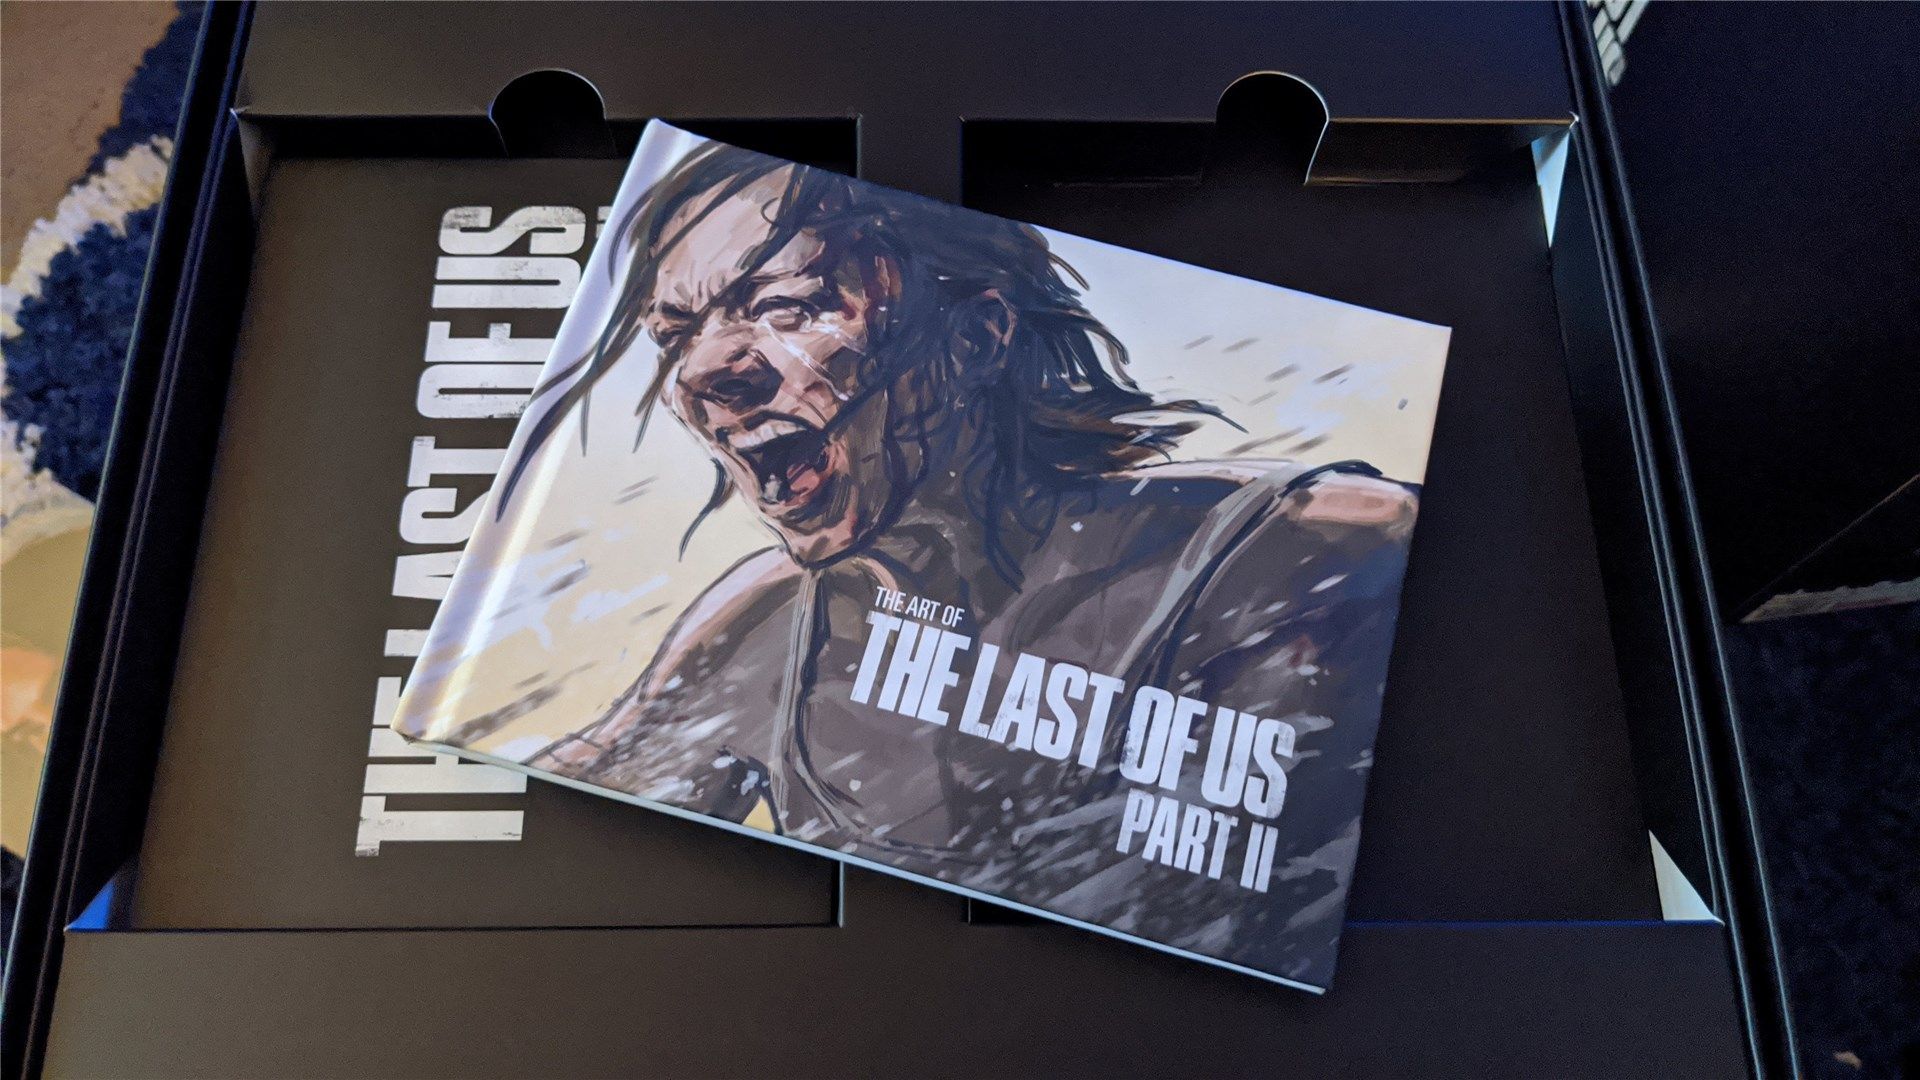 The Last of Us Part II Collector's Edition mini art book